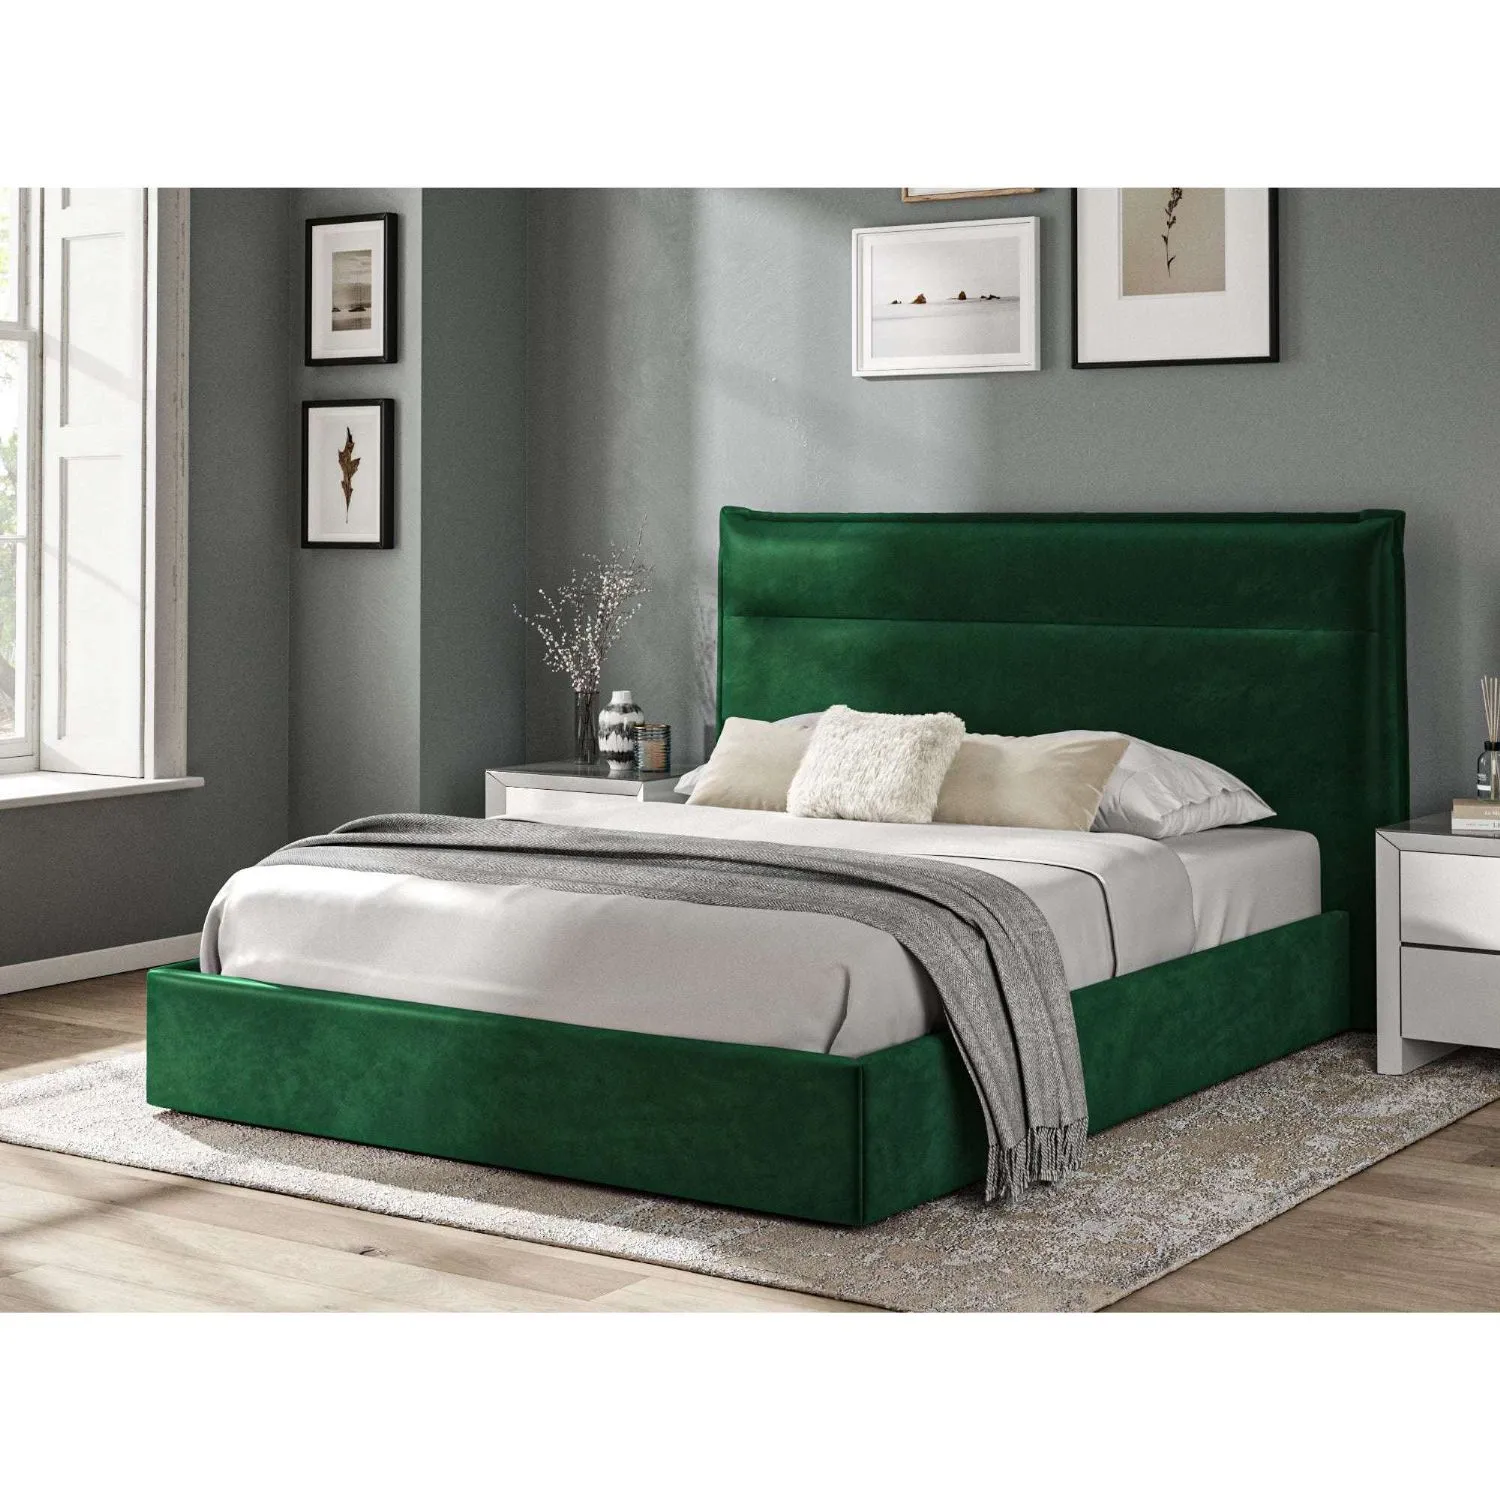 Fabric Bed Collection Green 4